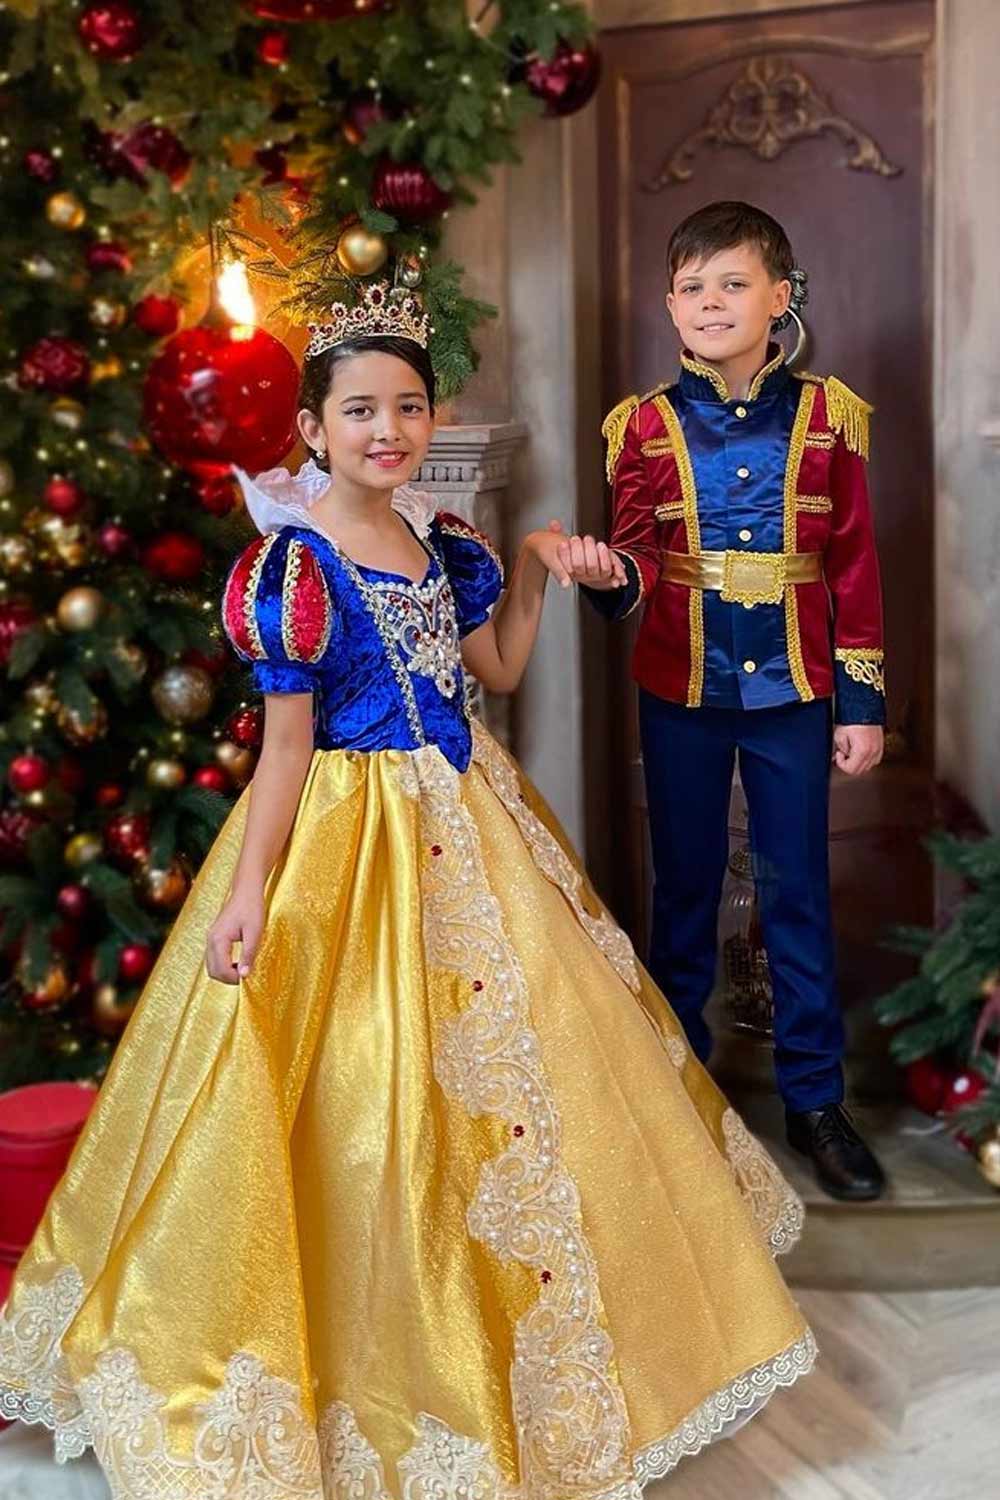 Snow White with Prince Halloween Look for Kids